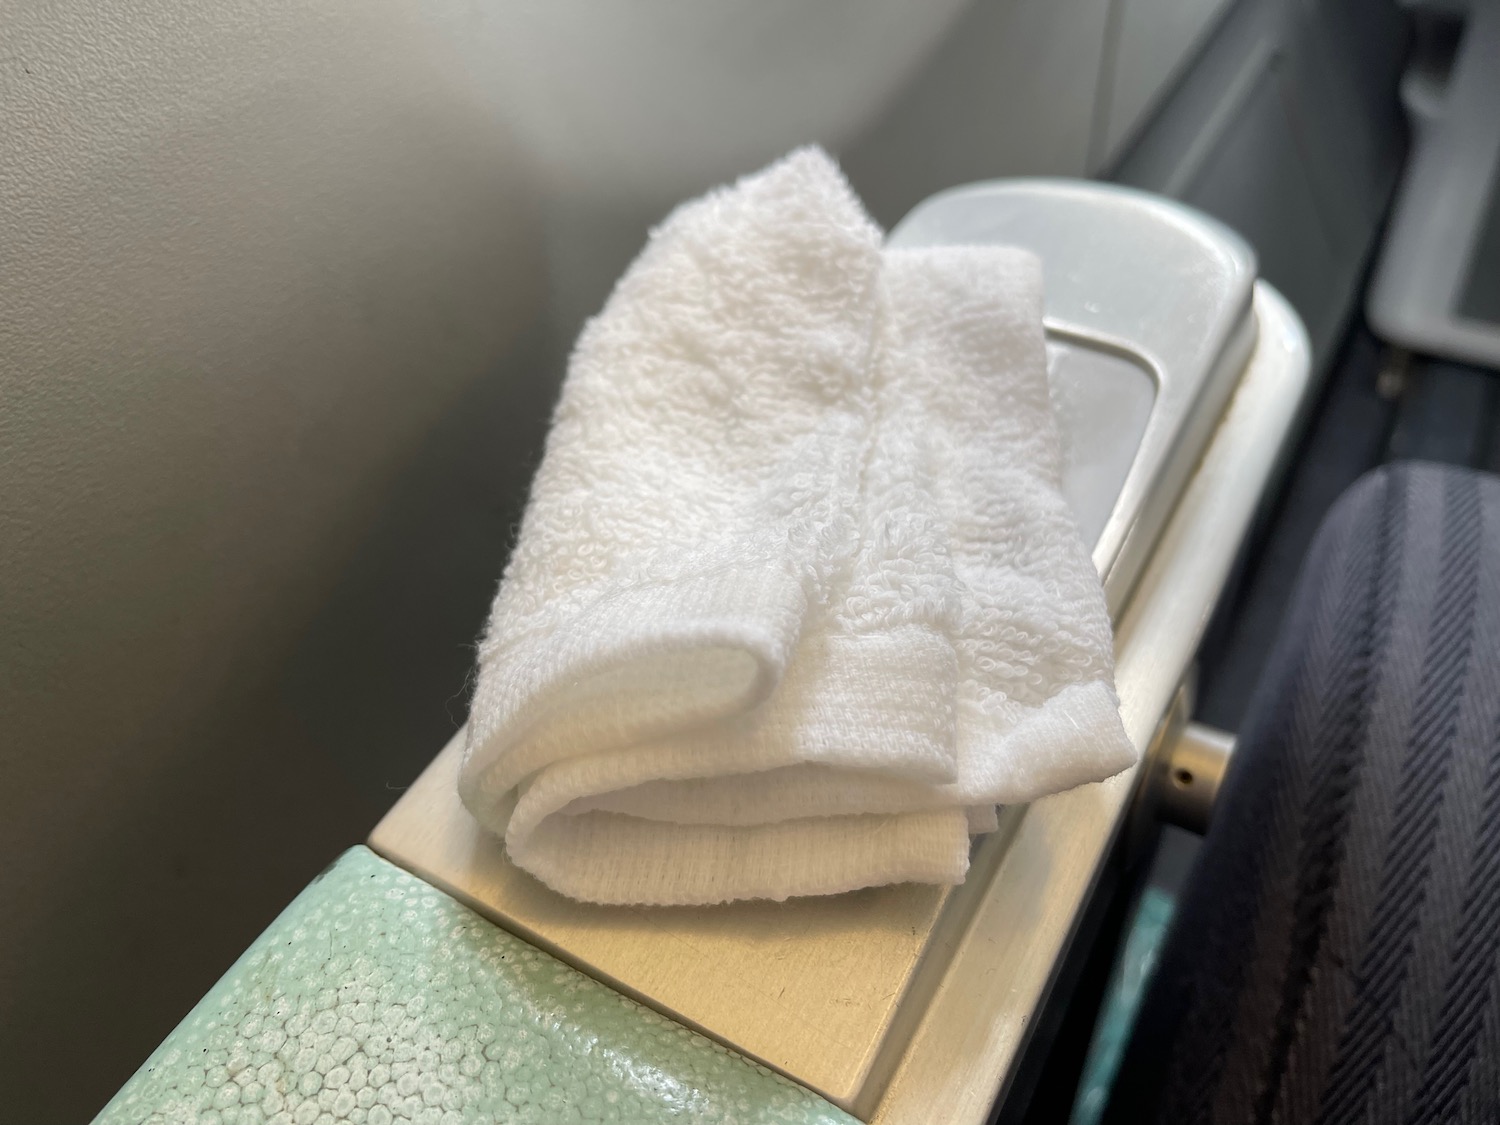 a white towel on a metal surface